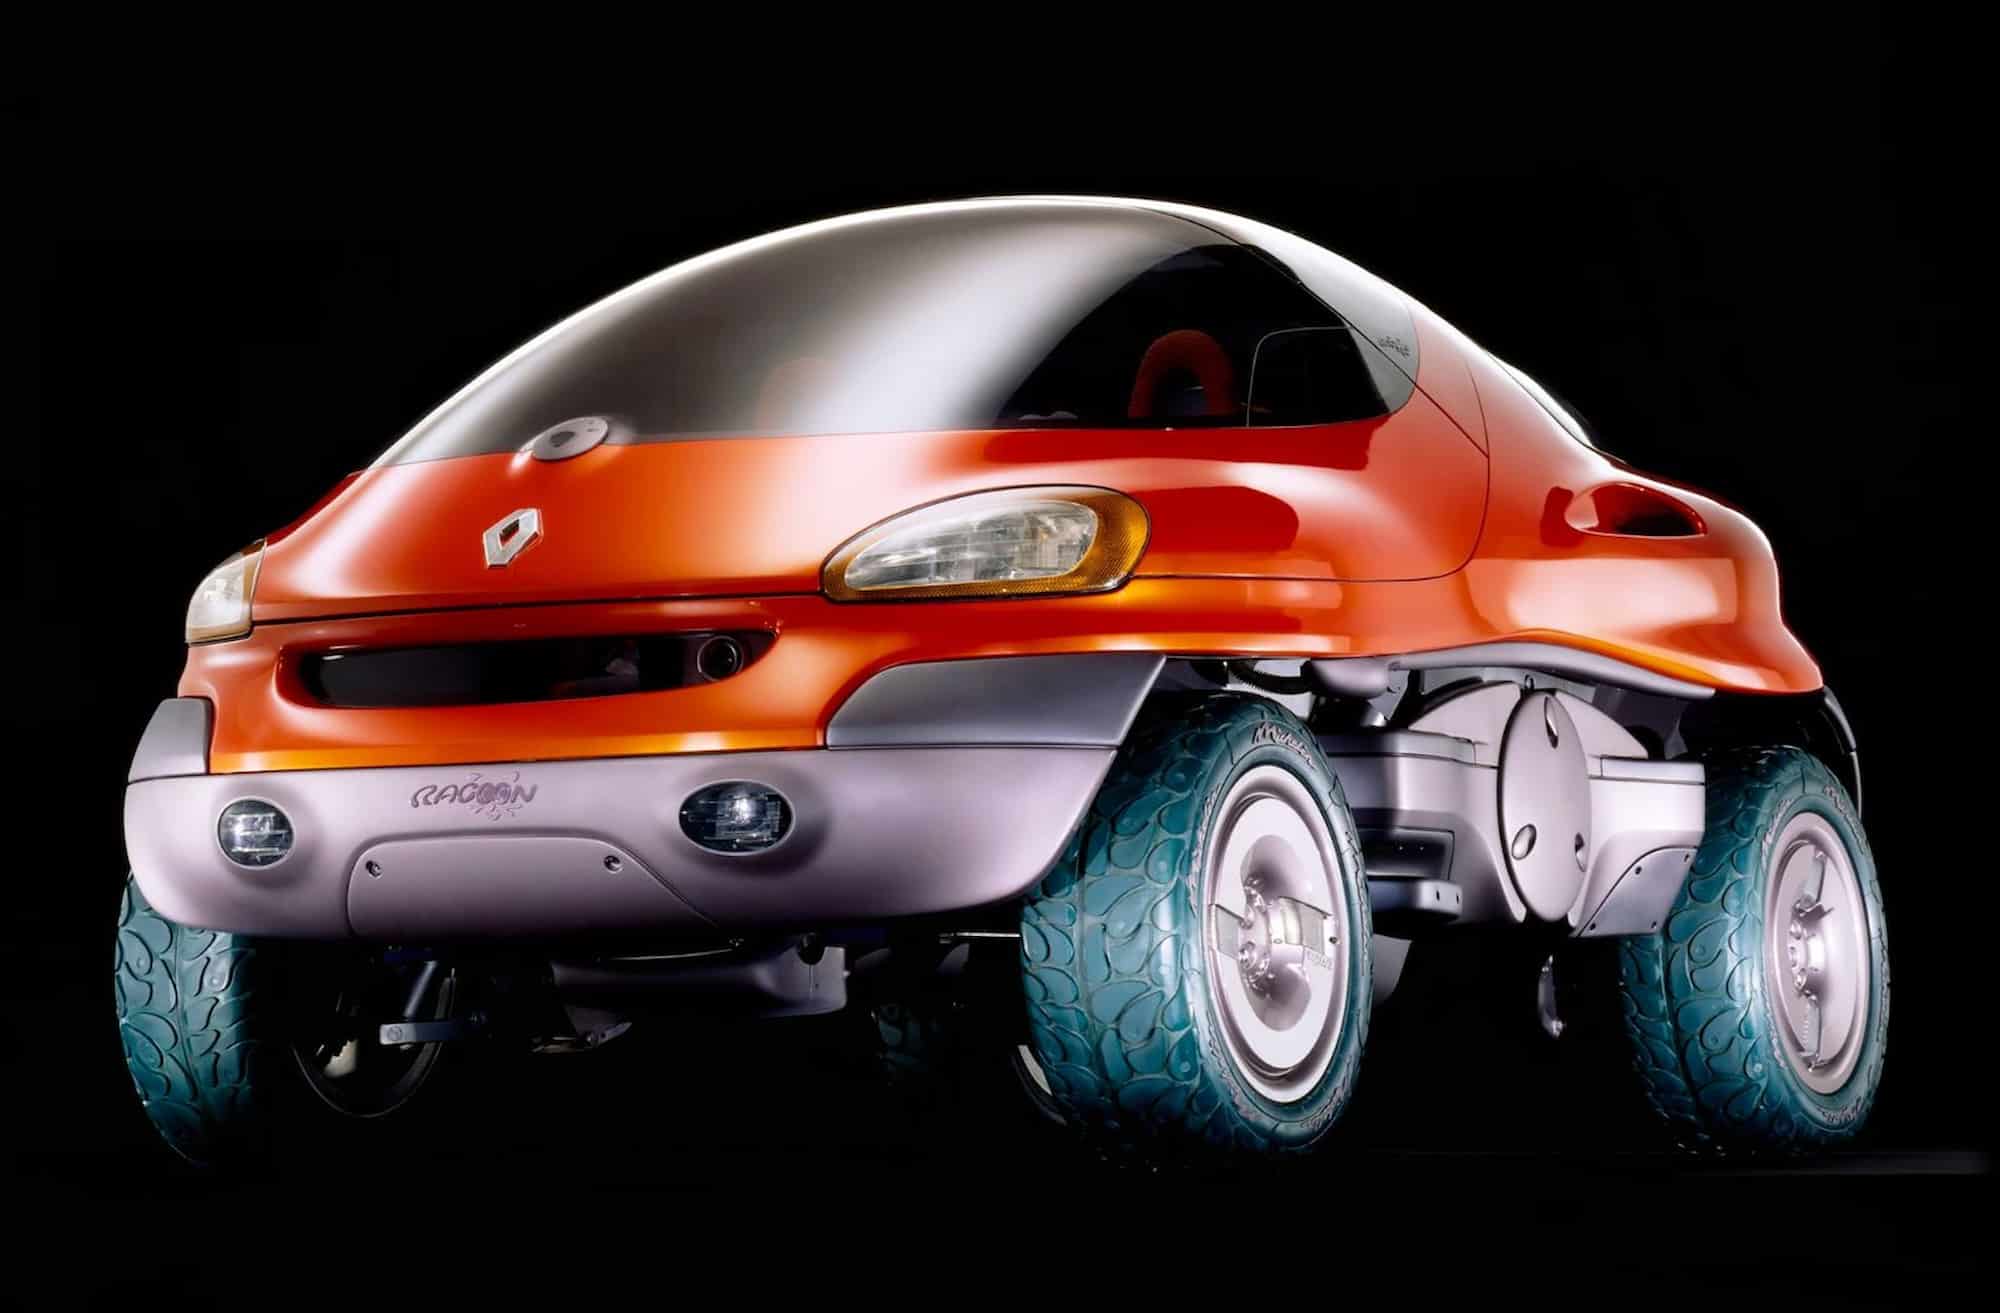 renault racoon an amphibious concept form the 1990s thats still mind blowing today 1